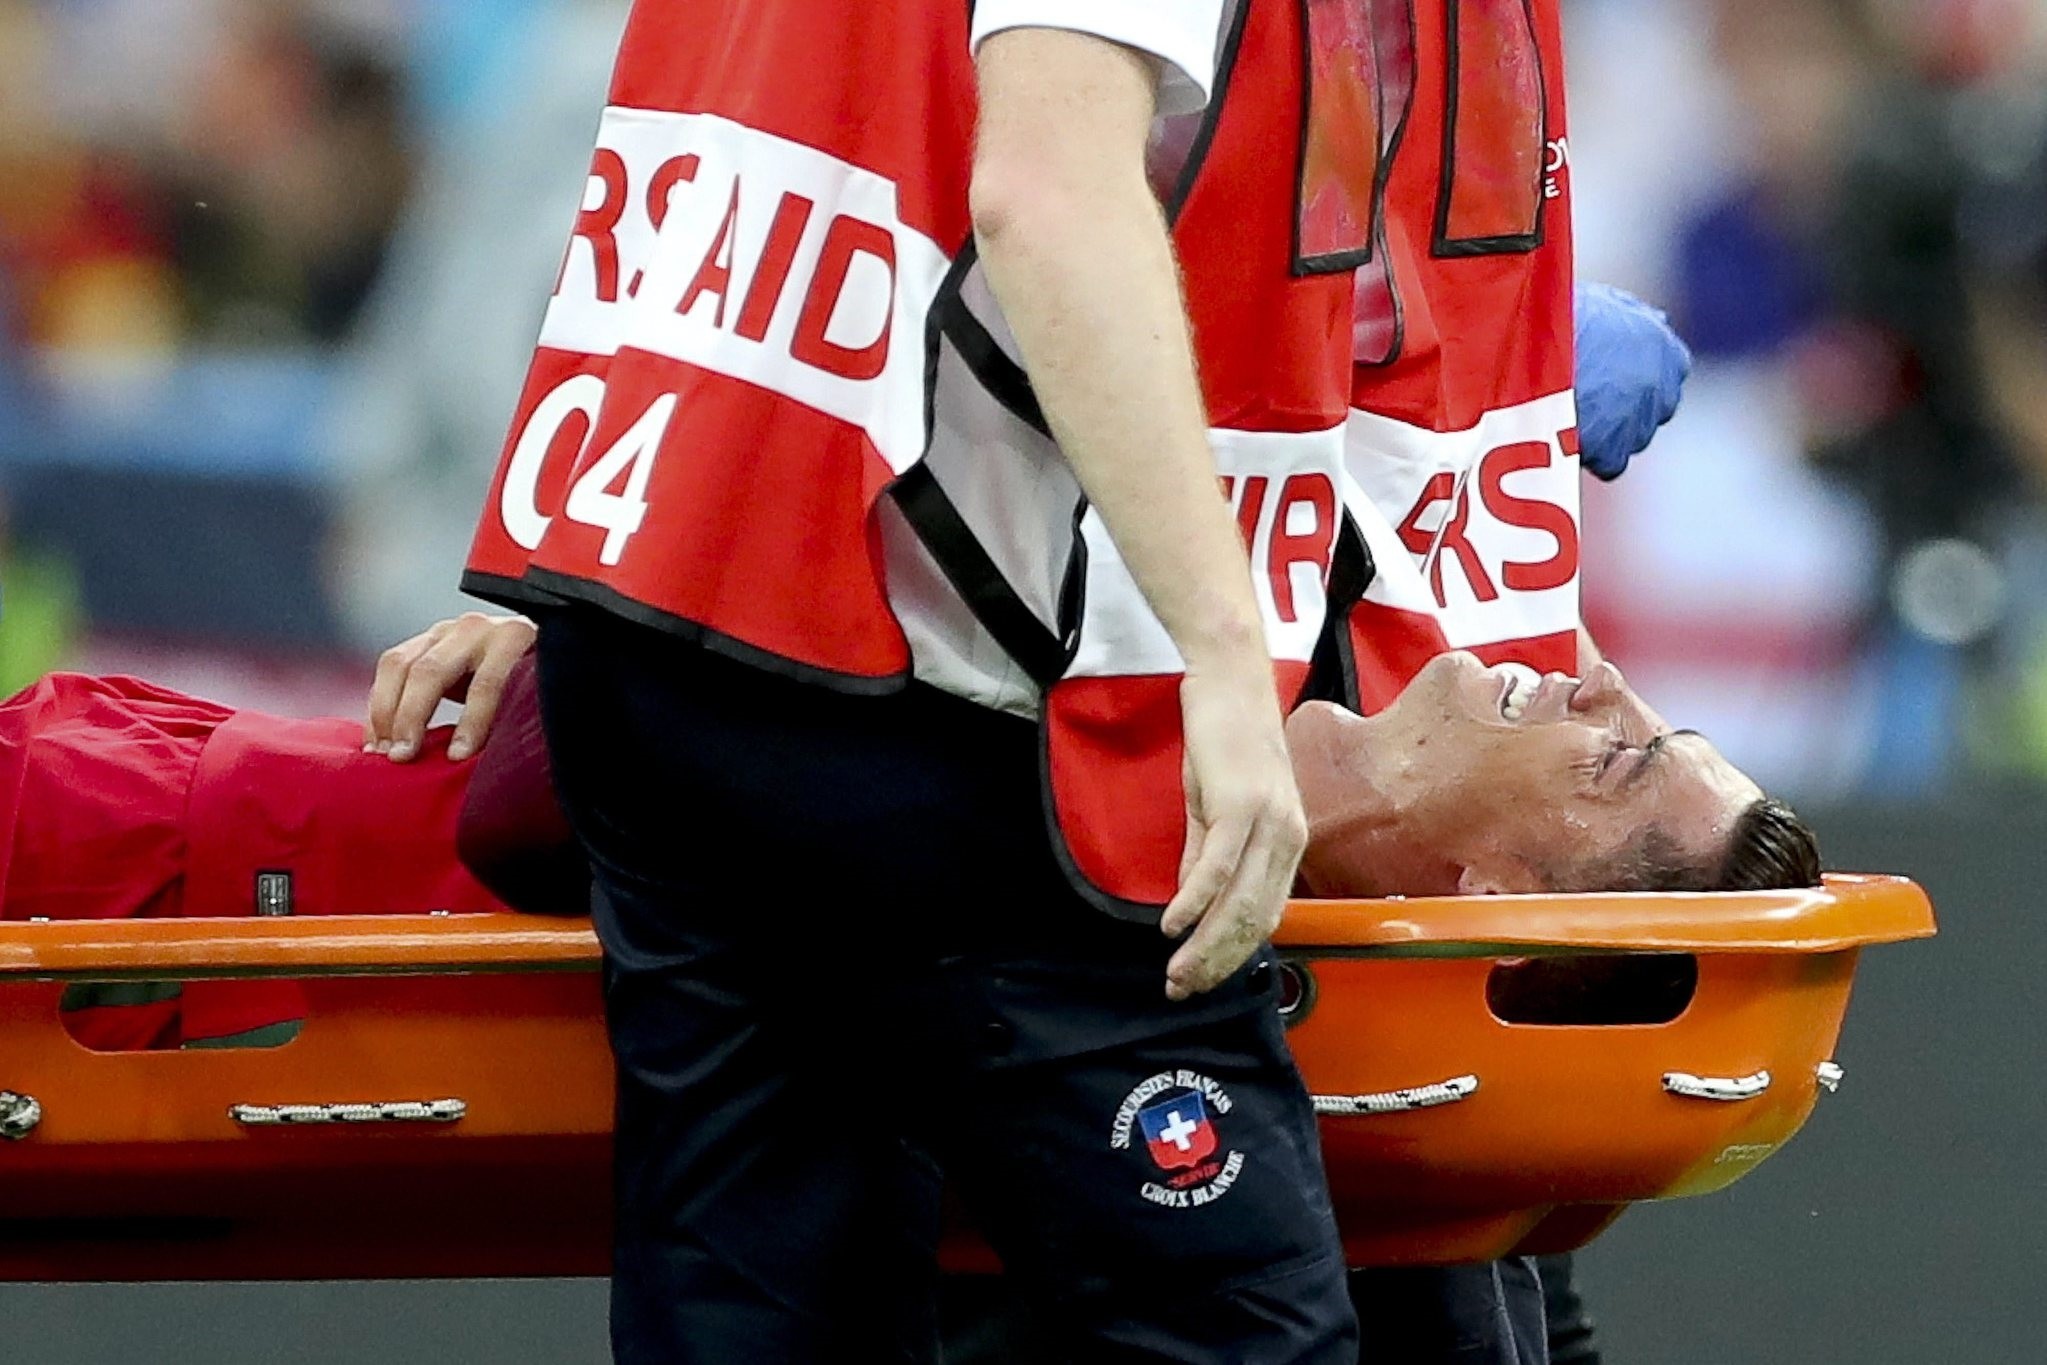 Cristiano Ronaldo of Portugal is stretchered off the pitch after being injured during the UEFA EURO 2016 Final match between Portugal and France at Stade de France in Saint-Denis, France, 10 July 2016. (EPA Photo)